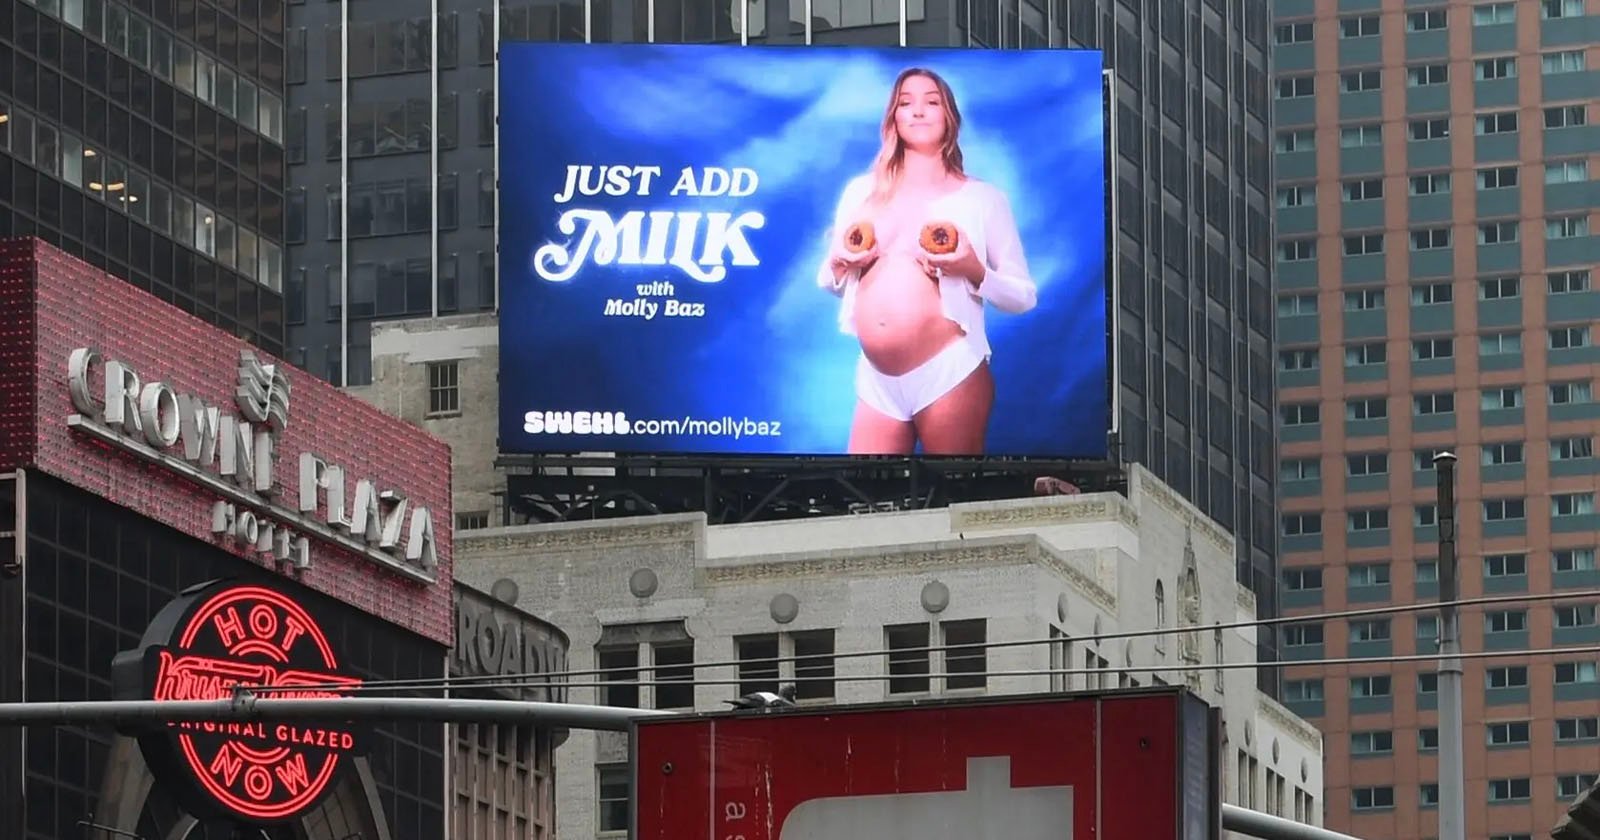 A digital billboard in a cityscape features an advertisement with a pregnant woman holding two bagels over her chest. The text reads, Just Add Milk with Molly Baz and includes a website URL sweetmilk.com/mollybaz. Surrounding the billboard are buildings and a Crown Plaza hotel.